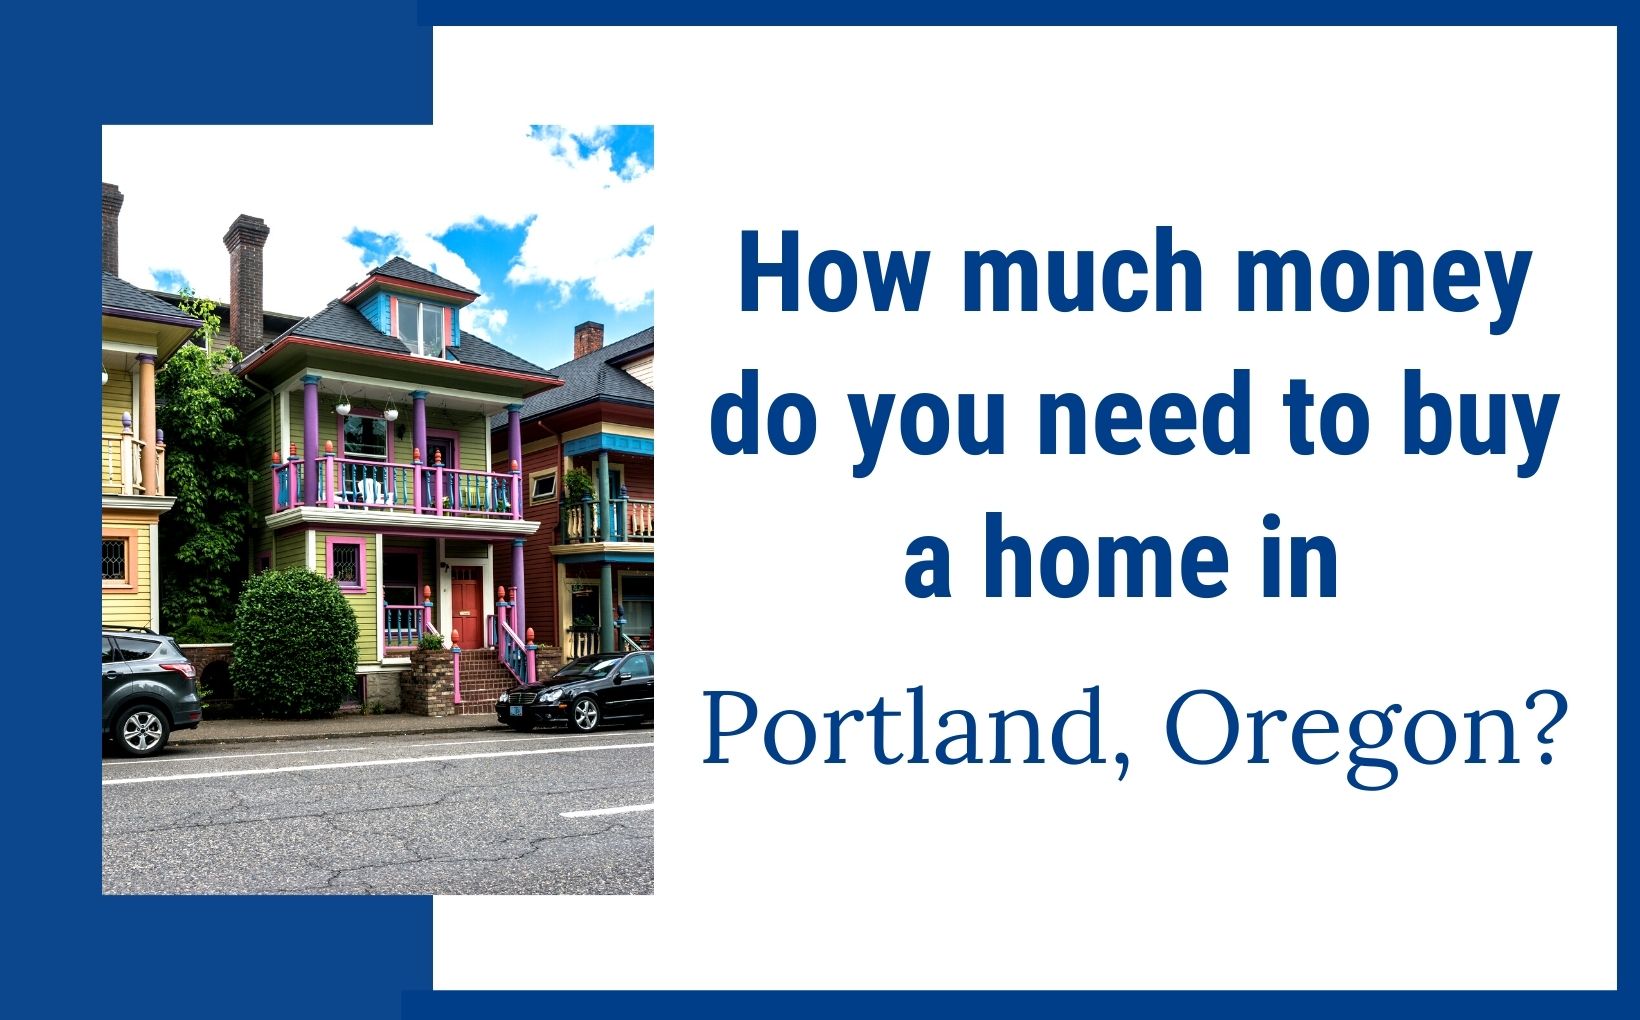 How much money do you need to buy a home in Portland Oregon feature image